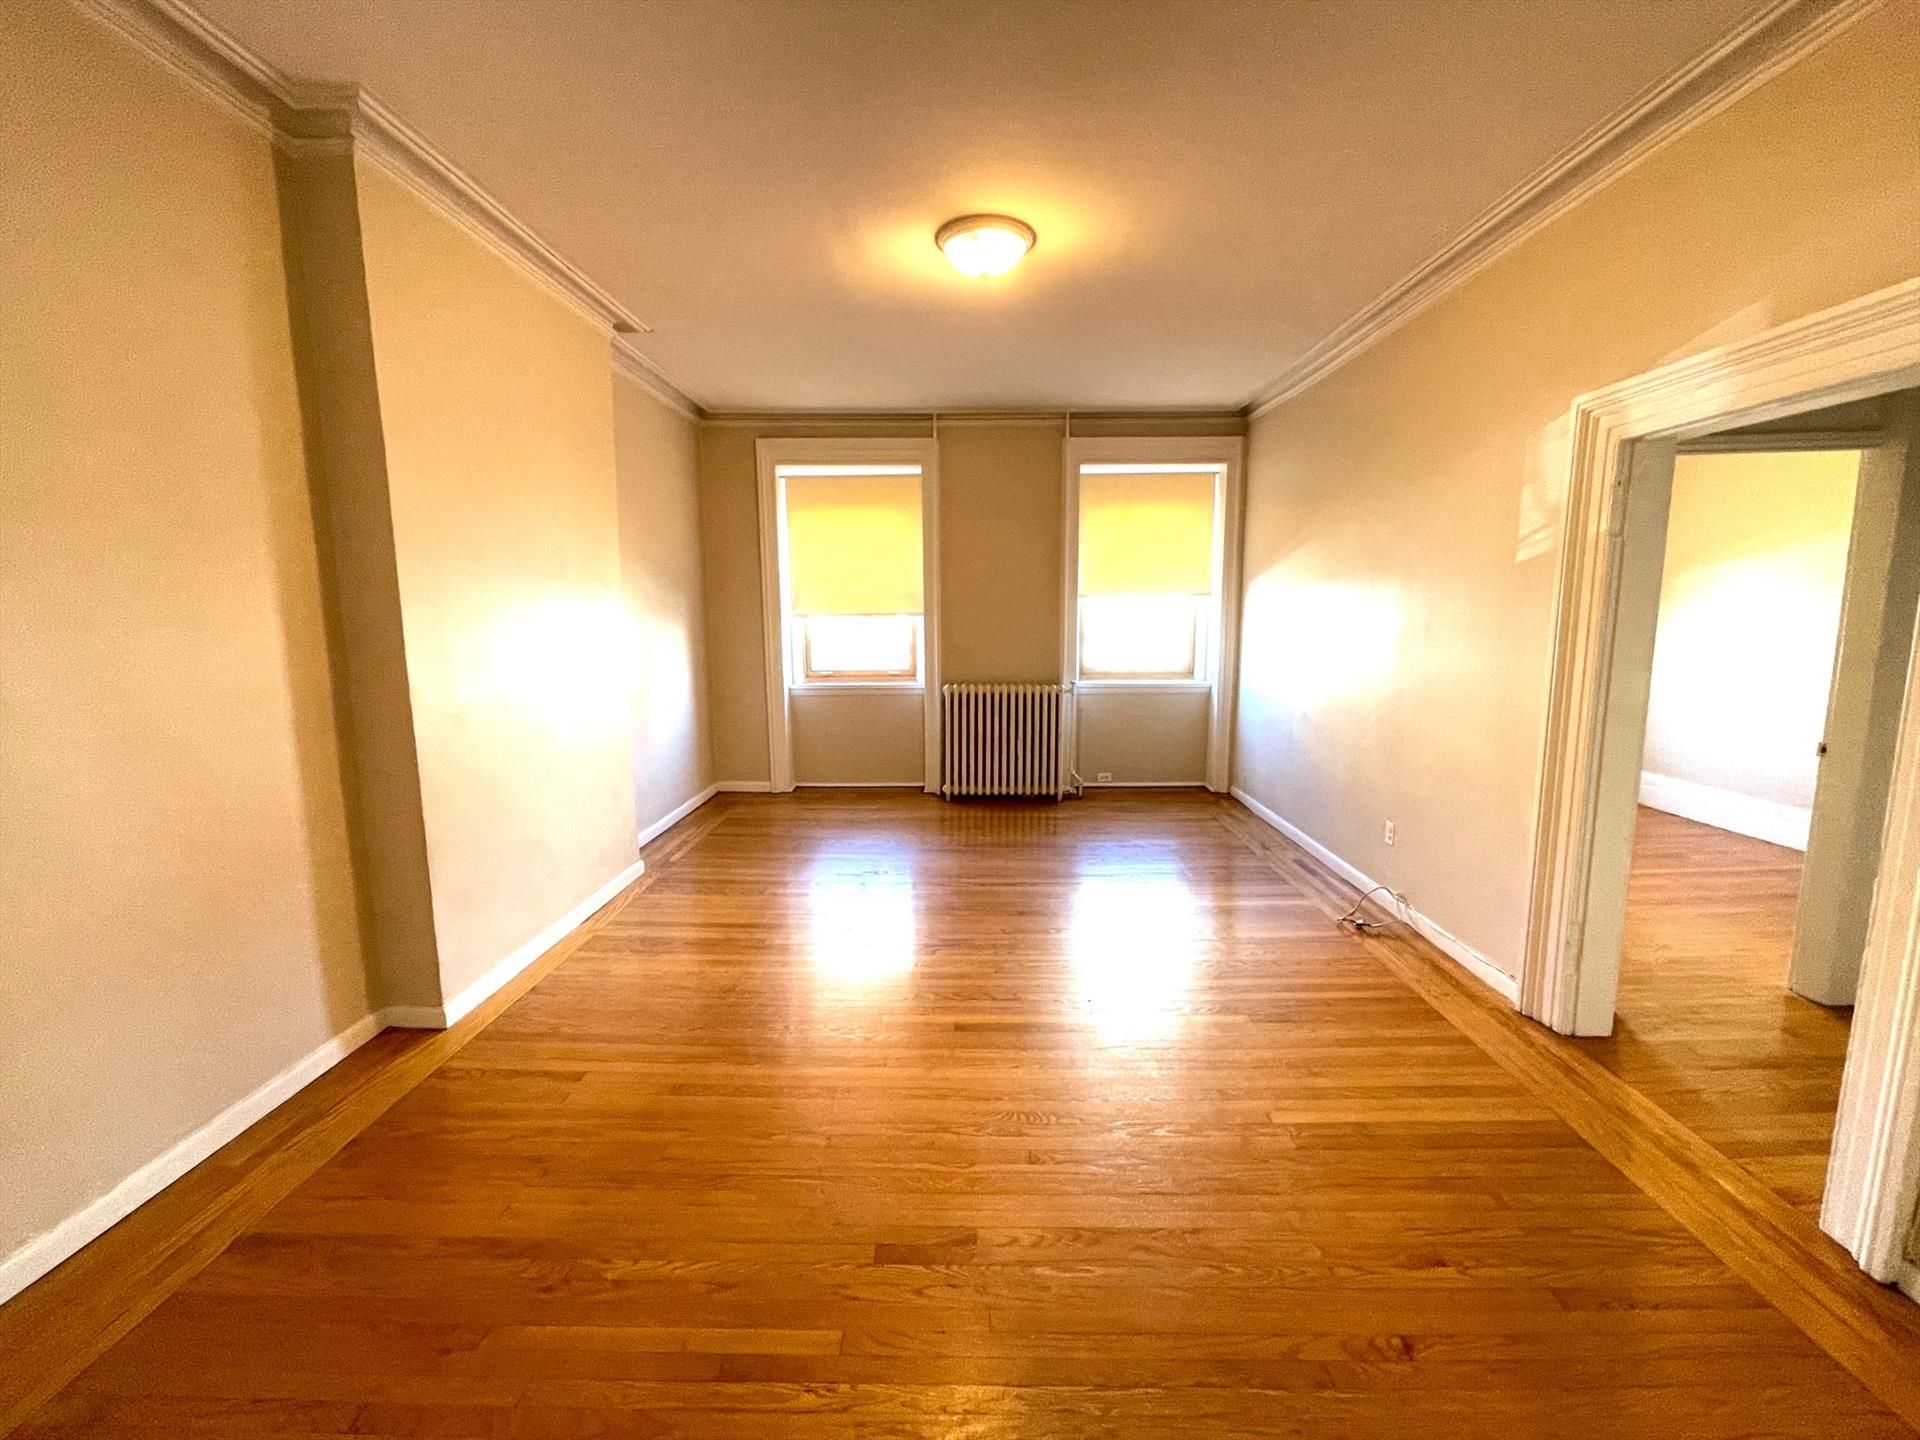 AMAZING LOCATION on 4th and Washington st!  HEAT AND HOT WATER ARE INCLUDED. Apartment features two HUGE living rooms!! Property also features nice hardwood floors, dishwasher, newly renovated kitchen, bathroom and plenty of closet space. 2 bed + den. Tenant is responsible for 1 month broker fee.